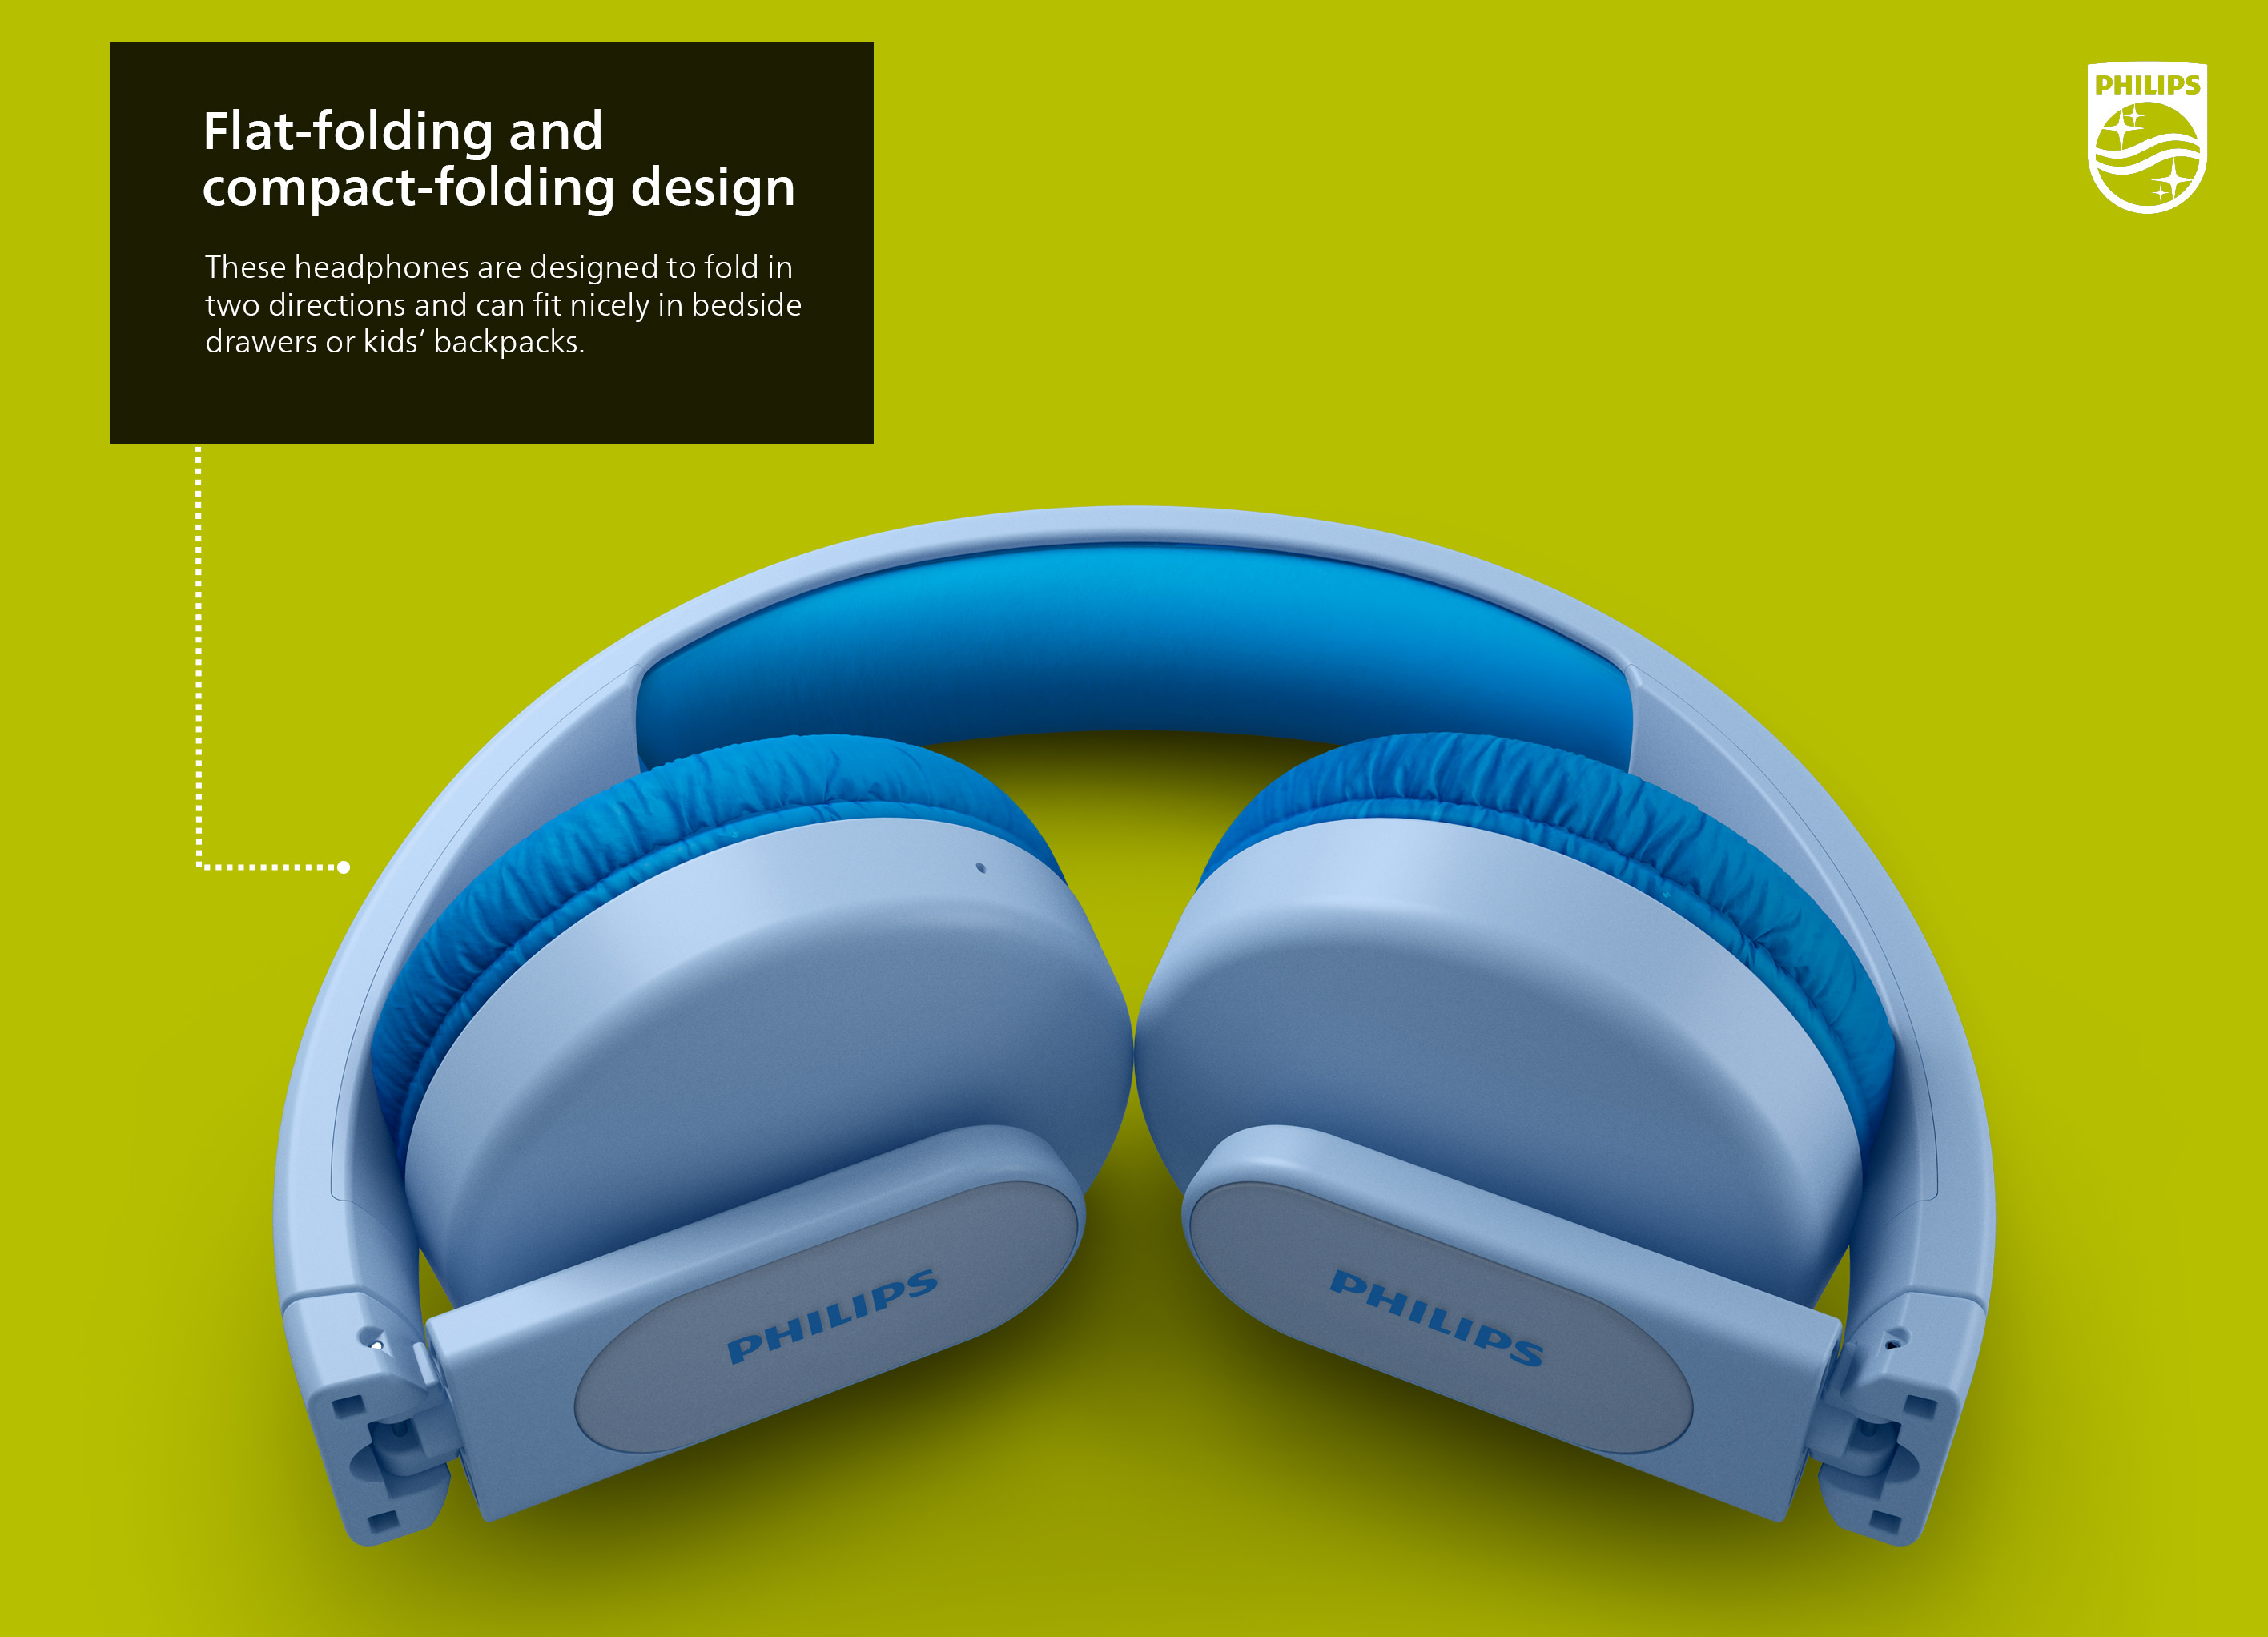 Philips K4206 Kids Wireless on-Ear Headphones with Parental Controls, Blue, TAK4206BL - image 2 of 11